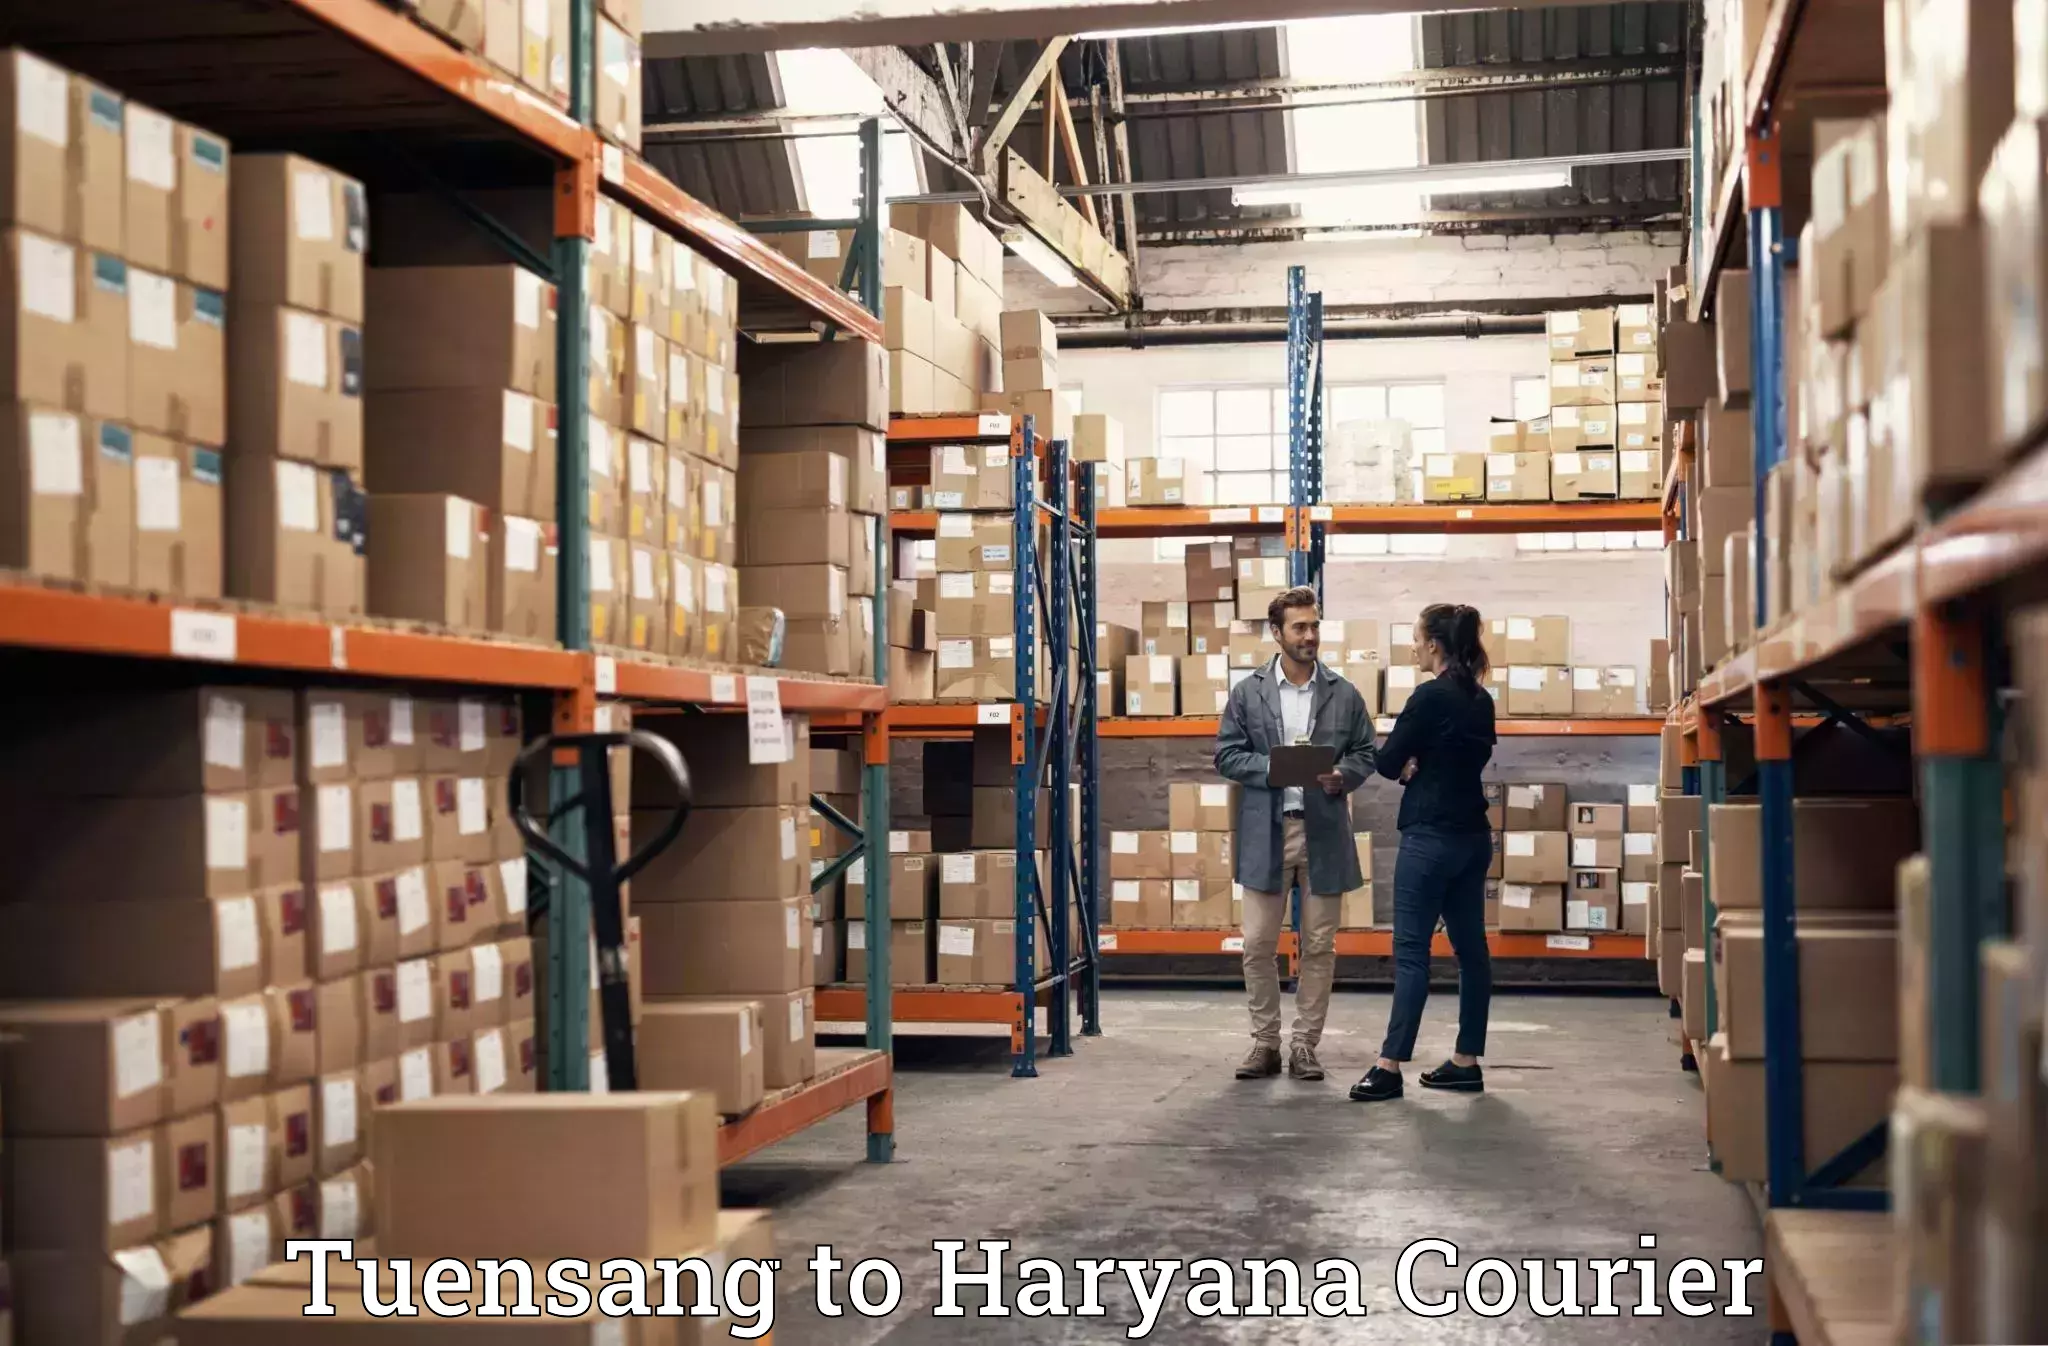 Trusted relocation experts Tuensang to Haryana